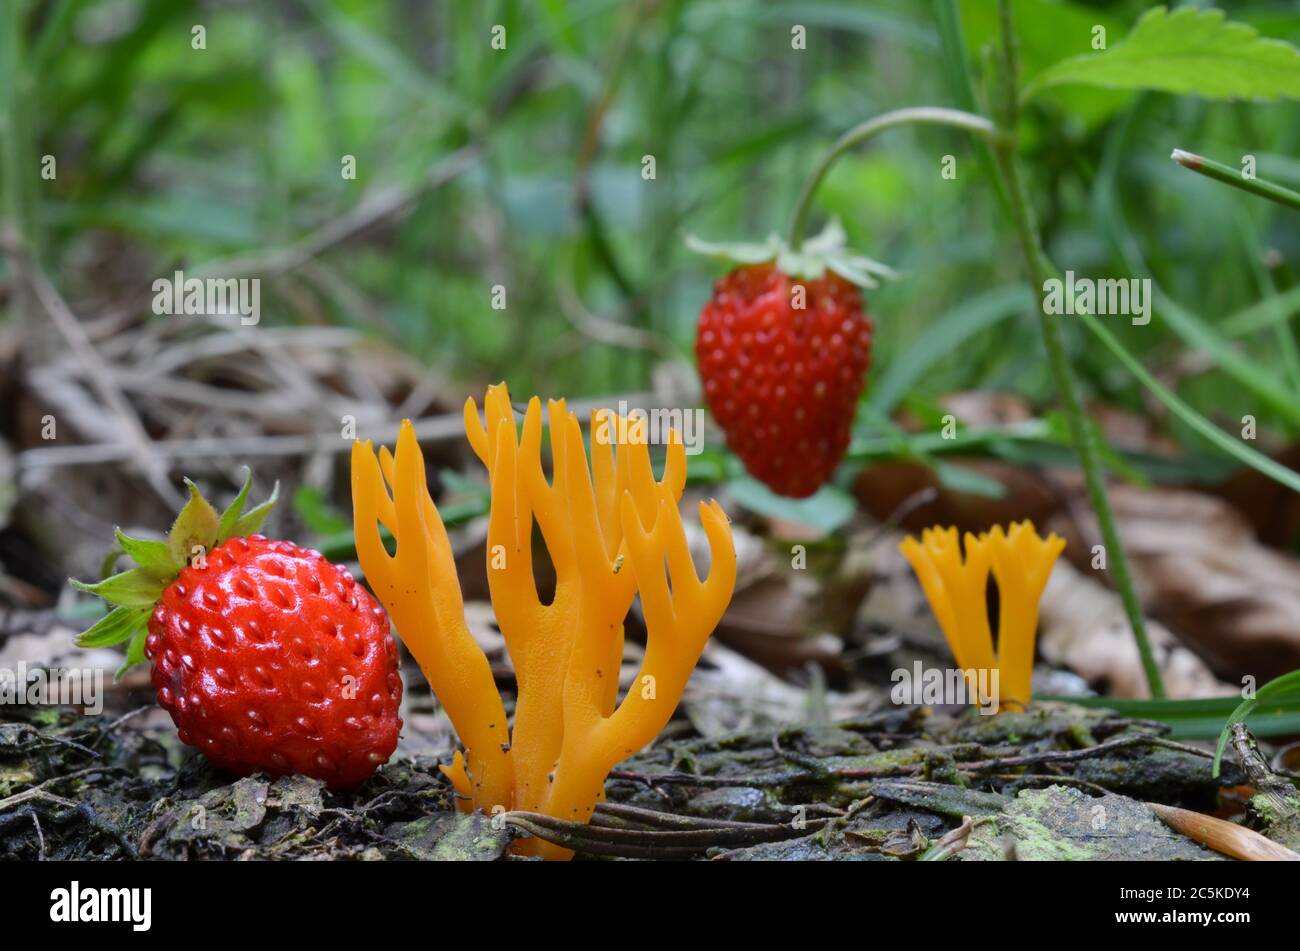 Yellow Stagshorn mushroom or Calocera viscosa in natural habitat, in the company of wild, ripe strawberries Stock Photo